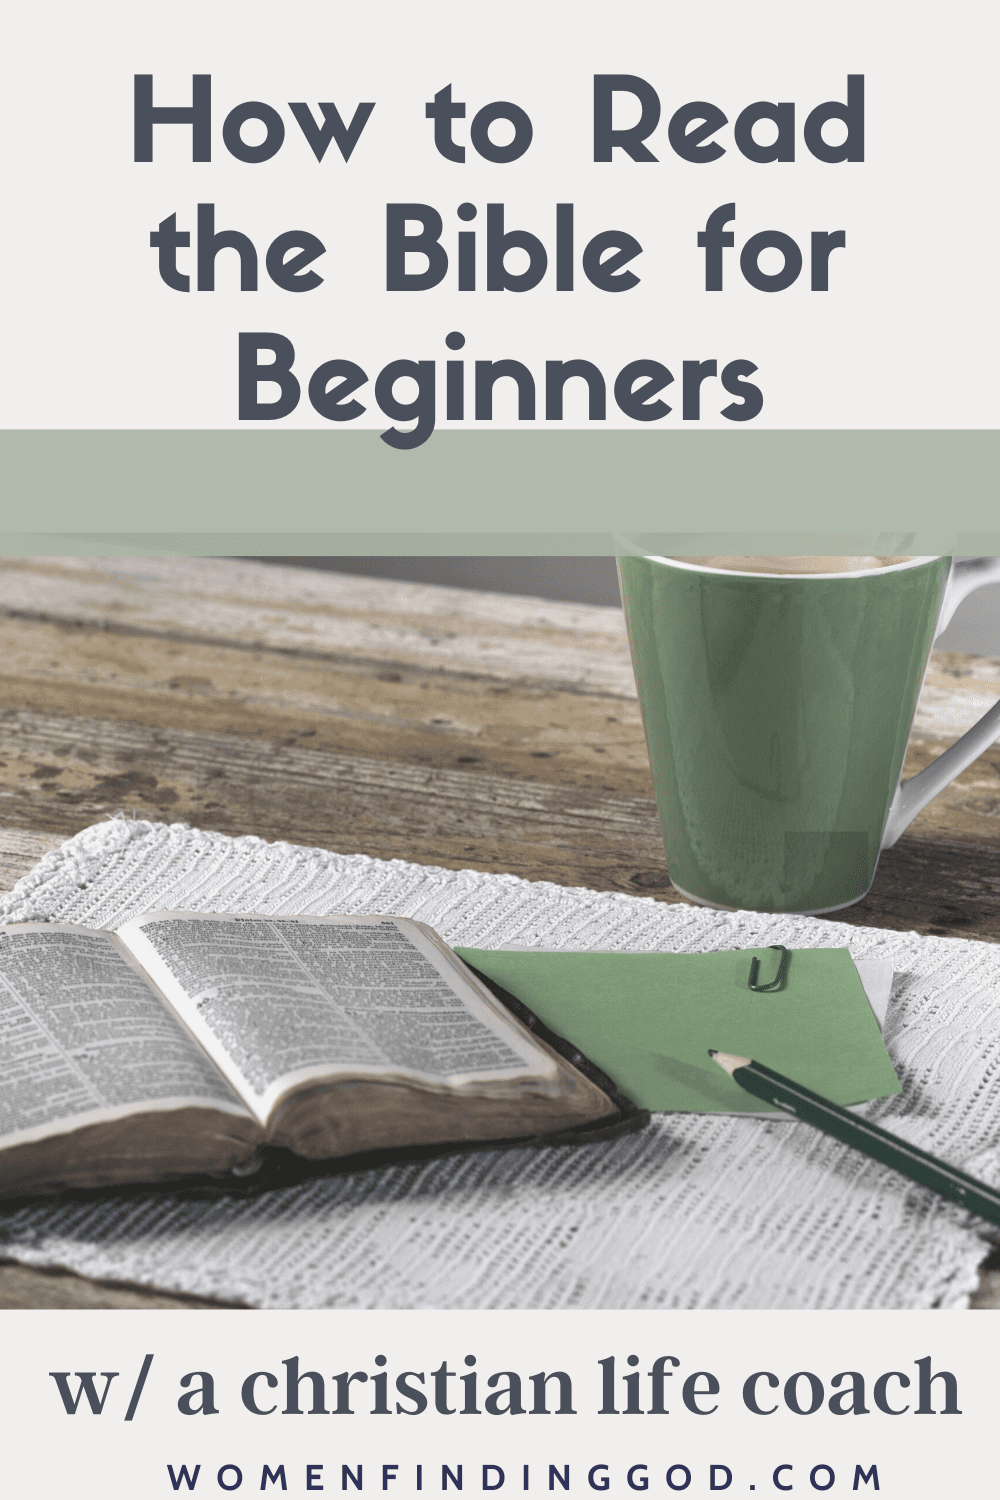 Are you ready to learn how to read the bible? Reading the Bible is one of the best ways to get closer to God! Here are some ideas on how to include this spiritual discipline in your daily quiet time with God. Plus, tips about creating your own bible reading plan and reading through the entire bible! via @womenfindinggod